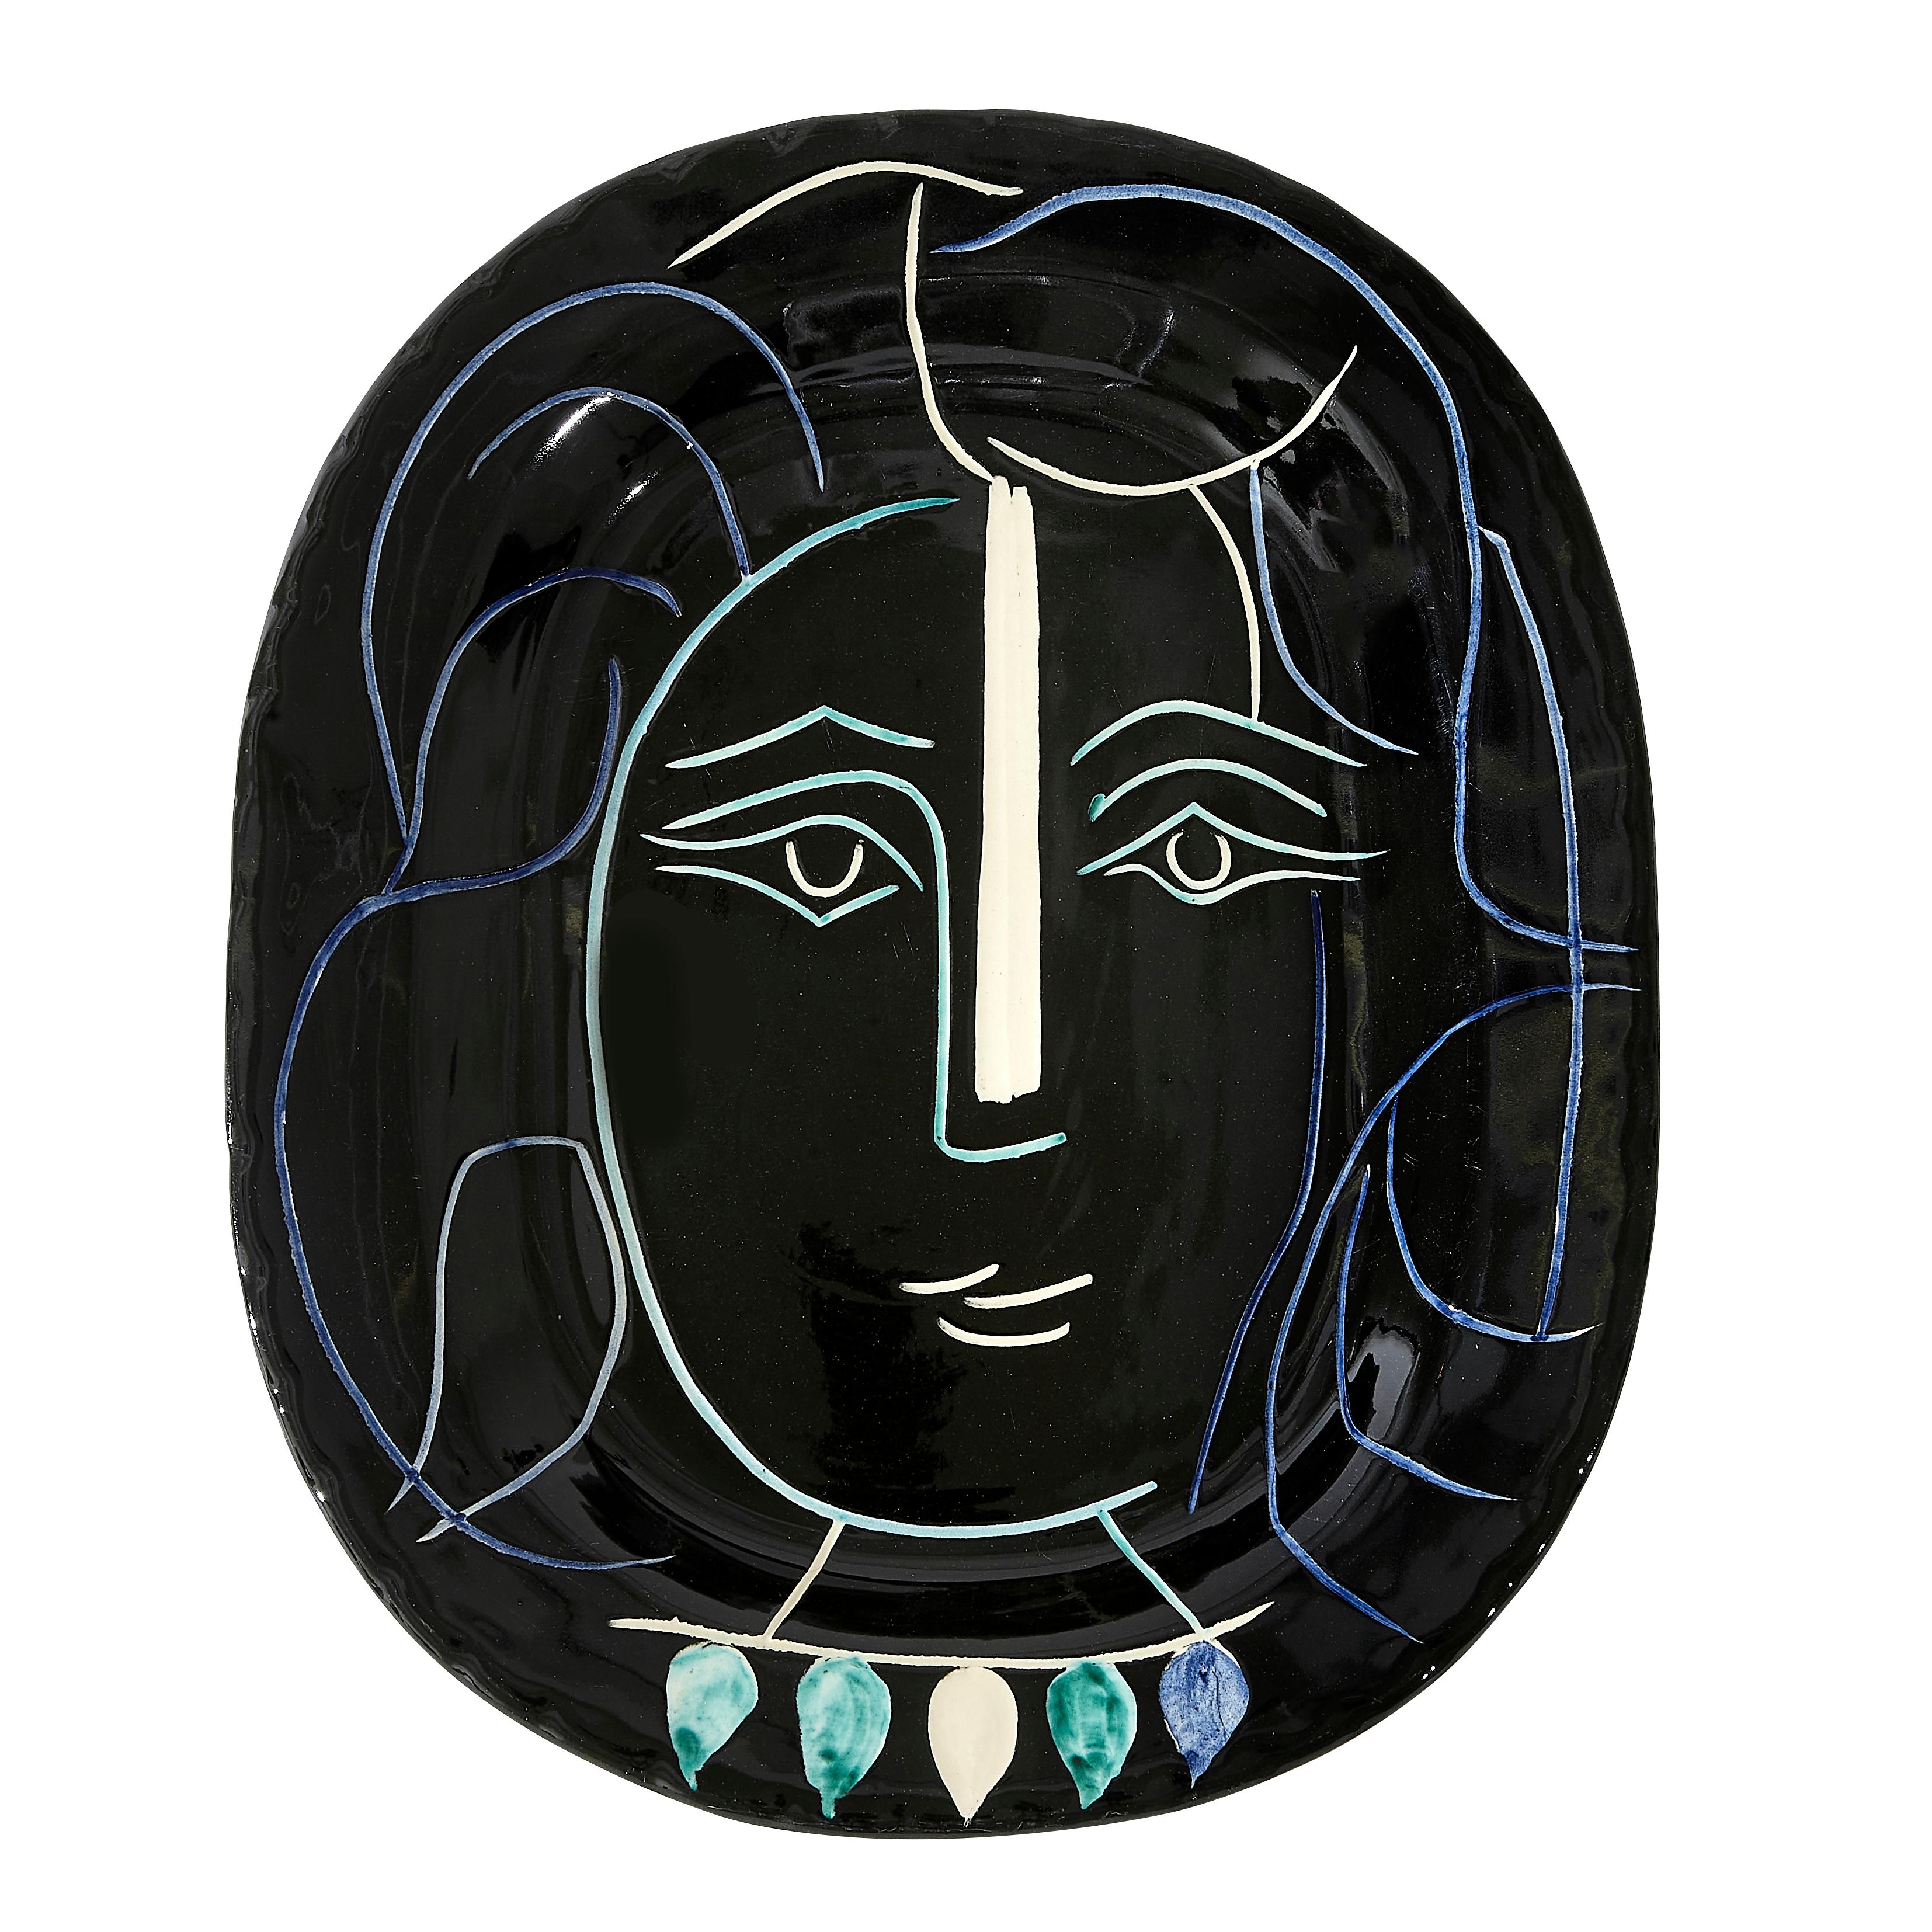 PABLO PICASSO (1881-1973) 
Visage de femme (A. R. 220)

Terre de faïence dish, 1953, from the edition of 400, inscribed 'Edition Picasso' and 'Madoura', glazed and painted, with the Edition Picasso and Madoura stamps.